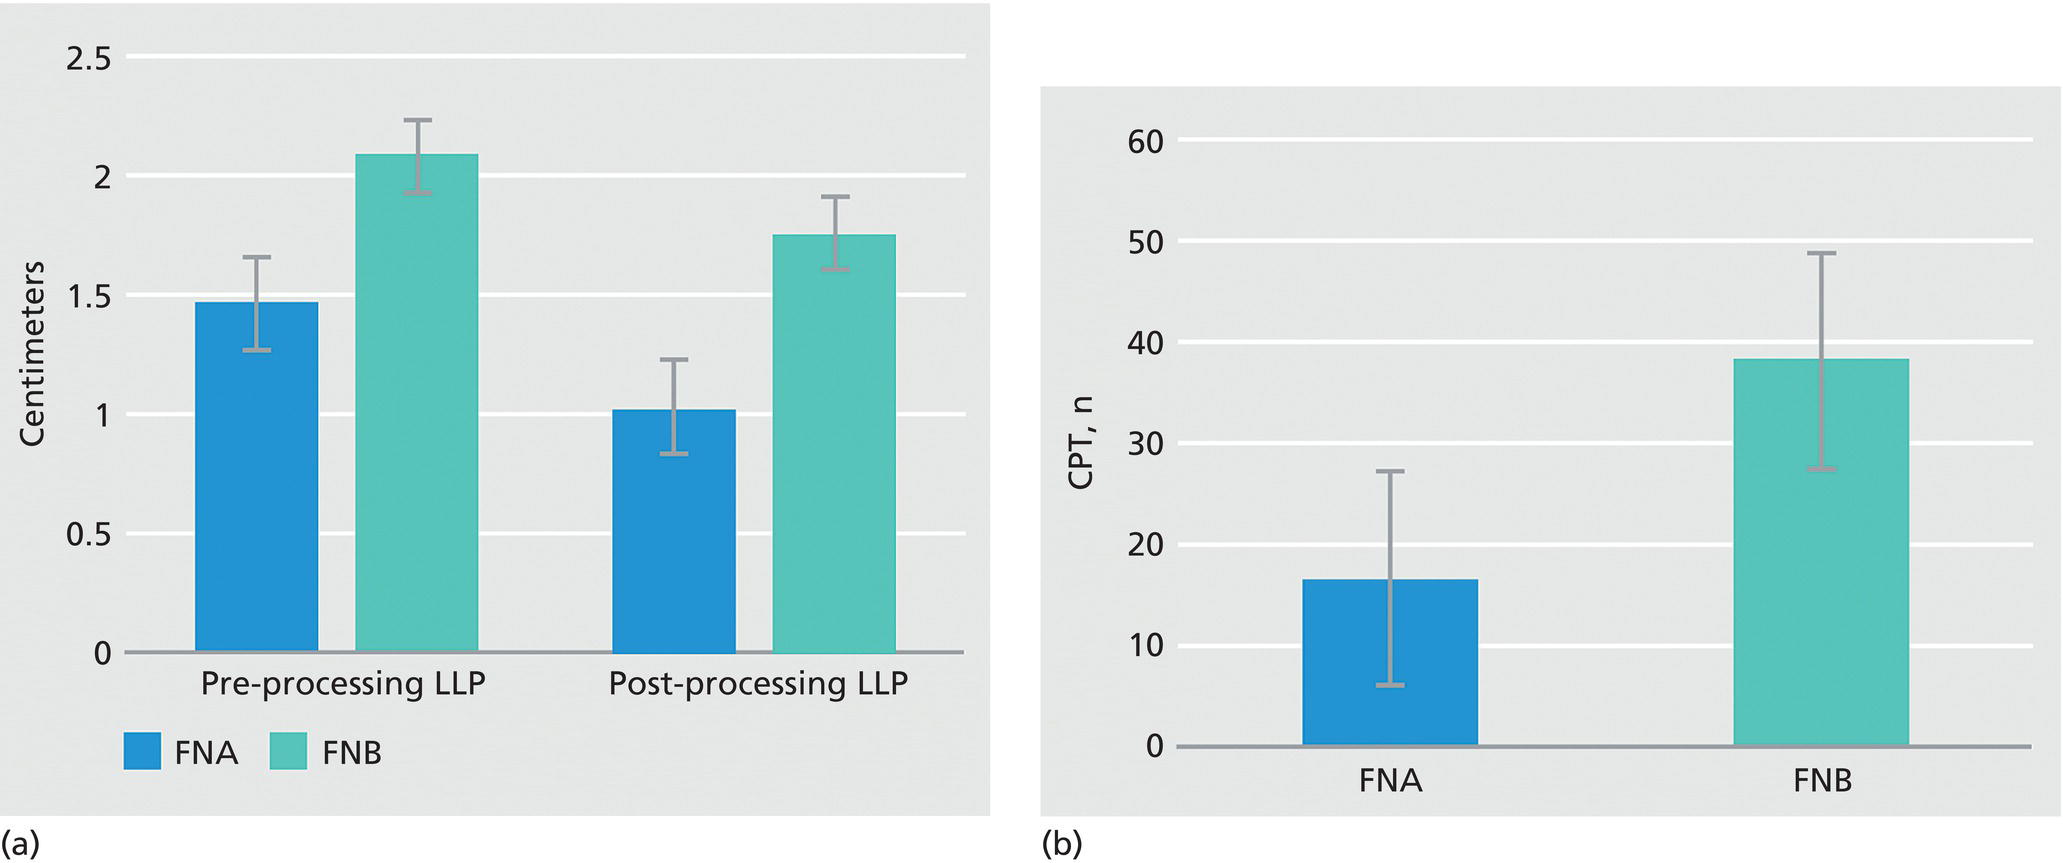 Bar charts depict the comparison of a 19G FNB needle to 19G FNA needle in terms of (a) length of the longest piece (LLP) before and after histologic processing, and (b) total complete portal triad (CPT) count as shown in a recent prospective randomized trial.